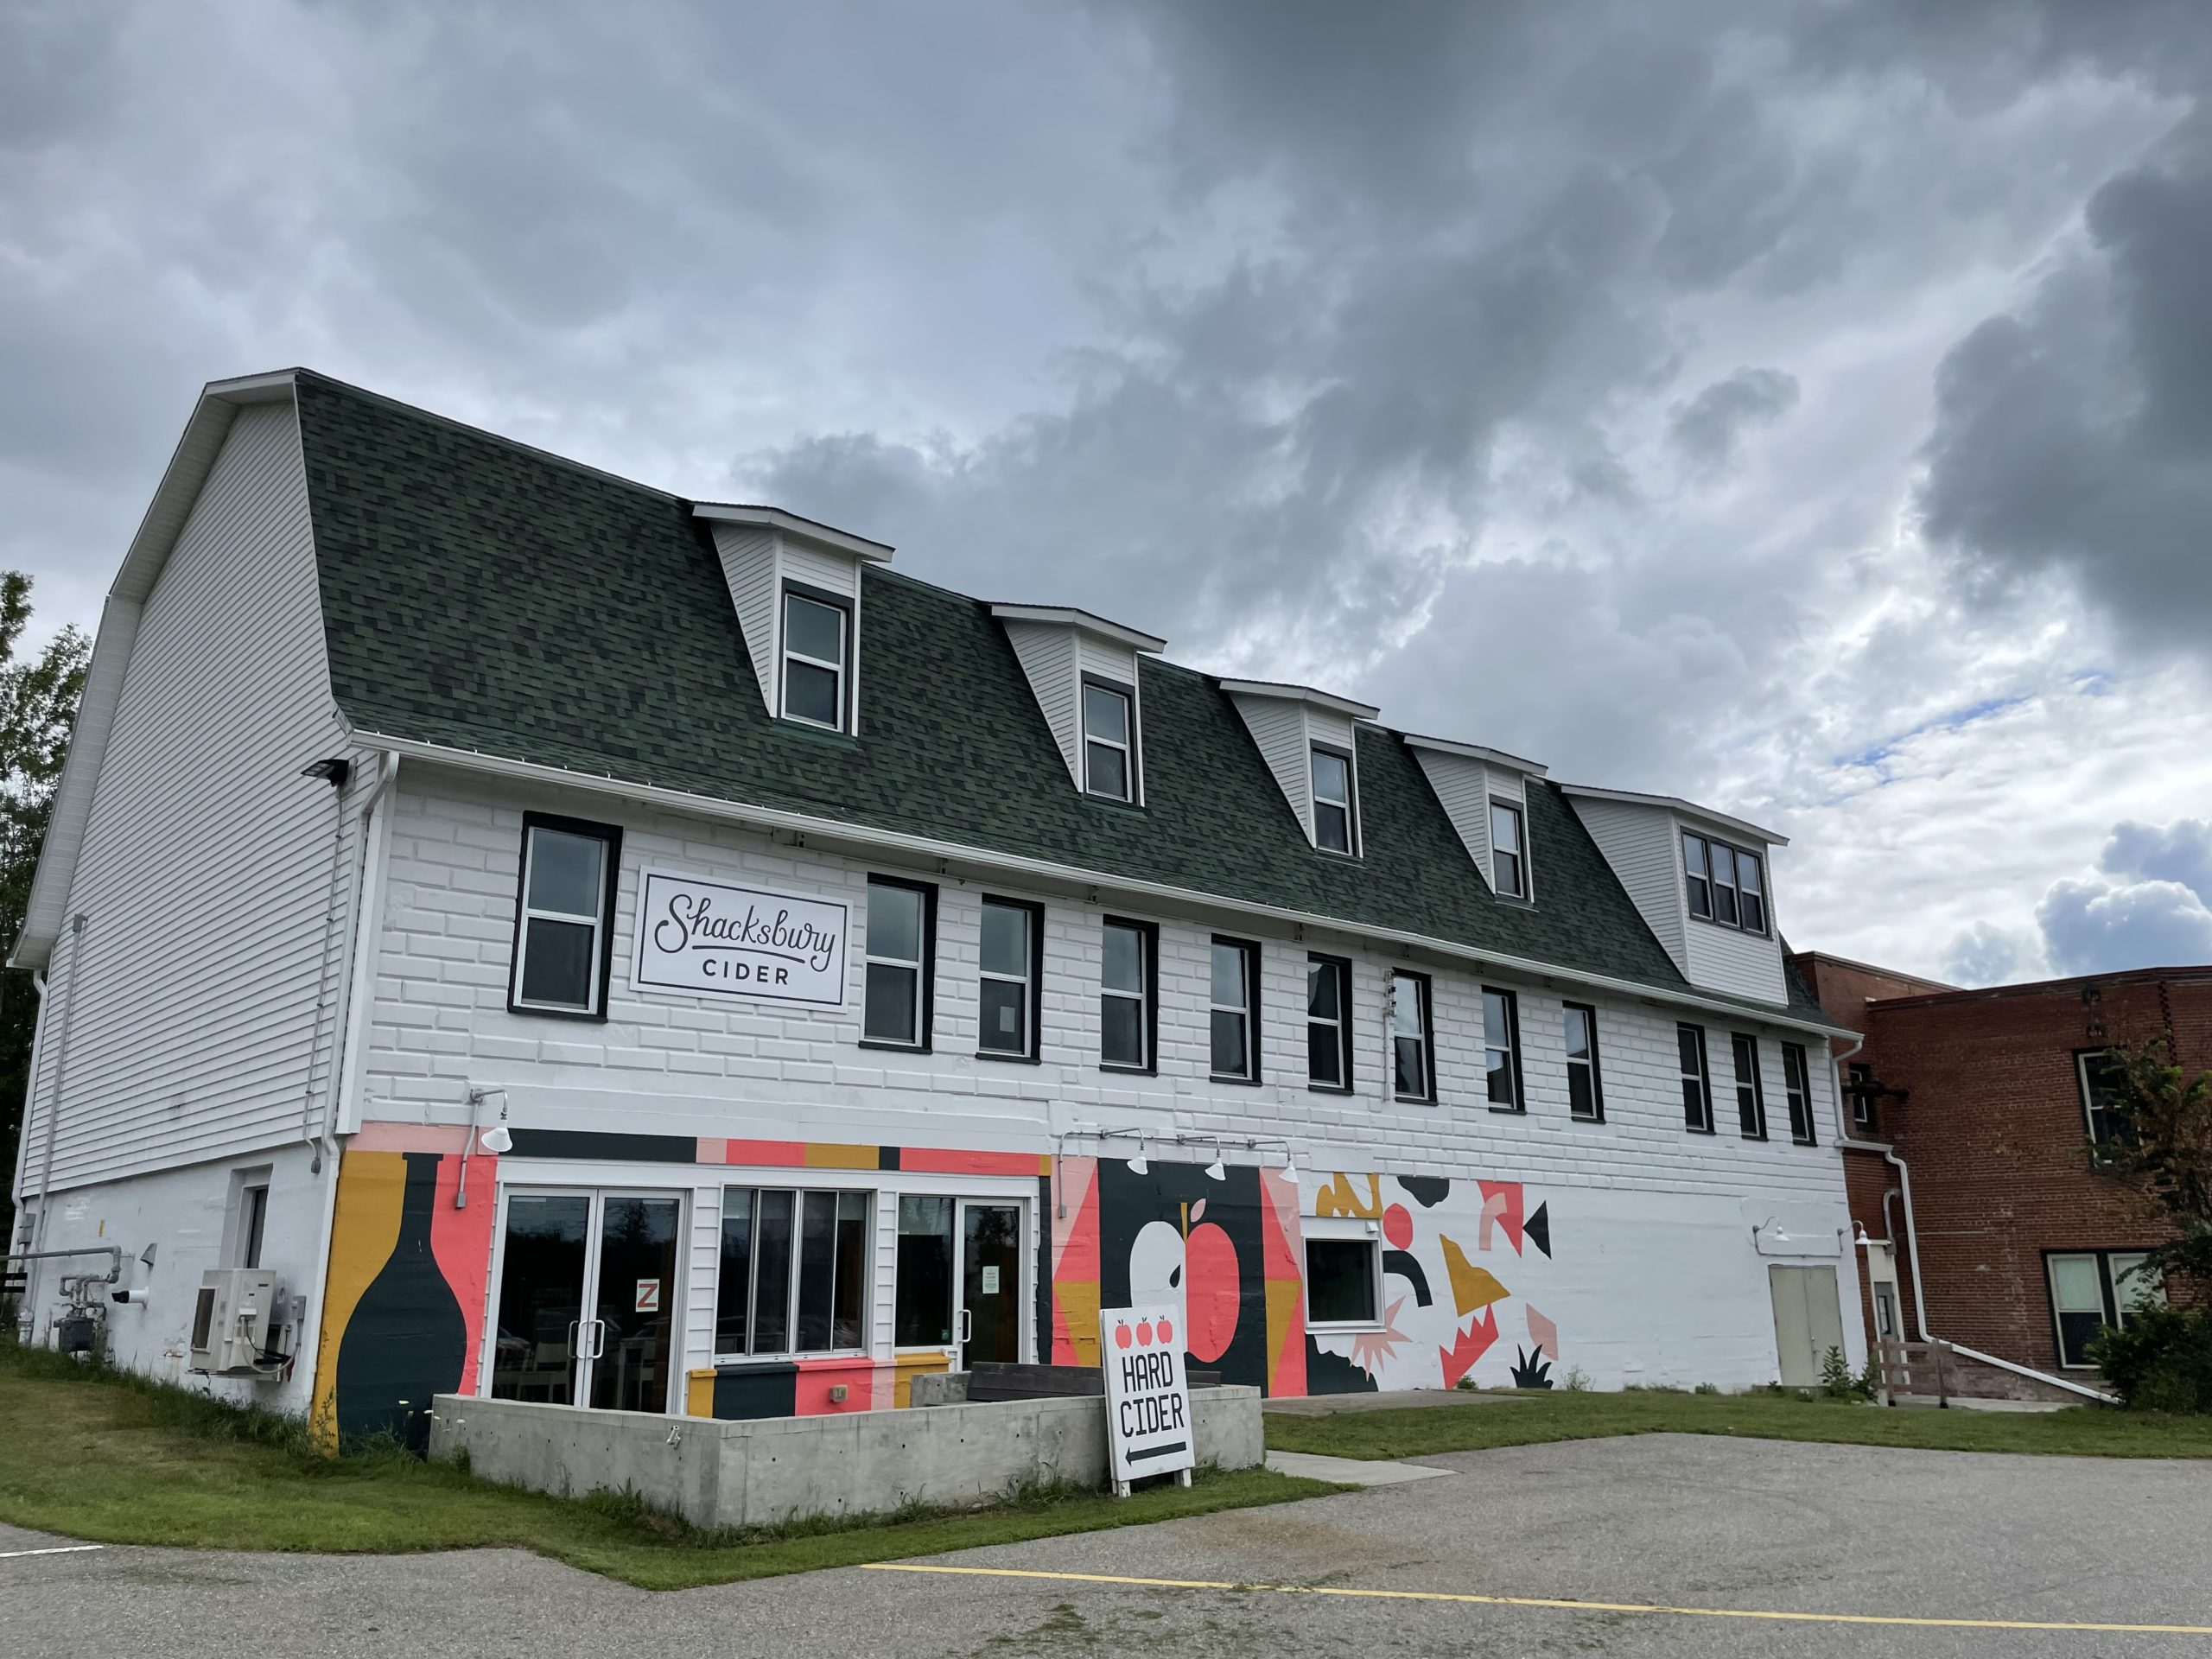 Exterior of a commercial property for rent at 11 Main Street, Vergennes, VT that used to be the home of Shacksbury Cider.